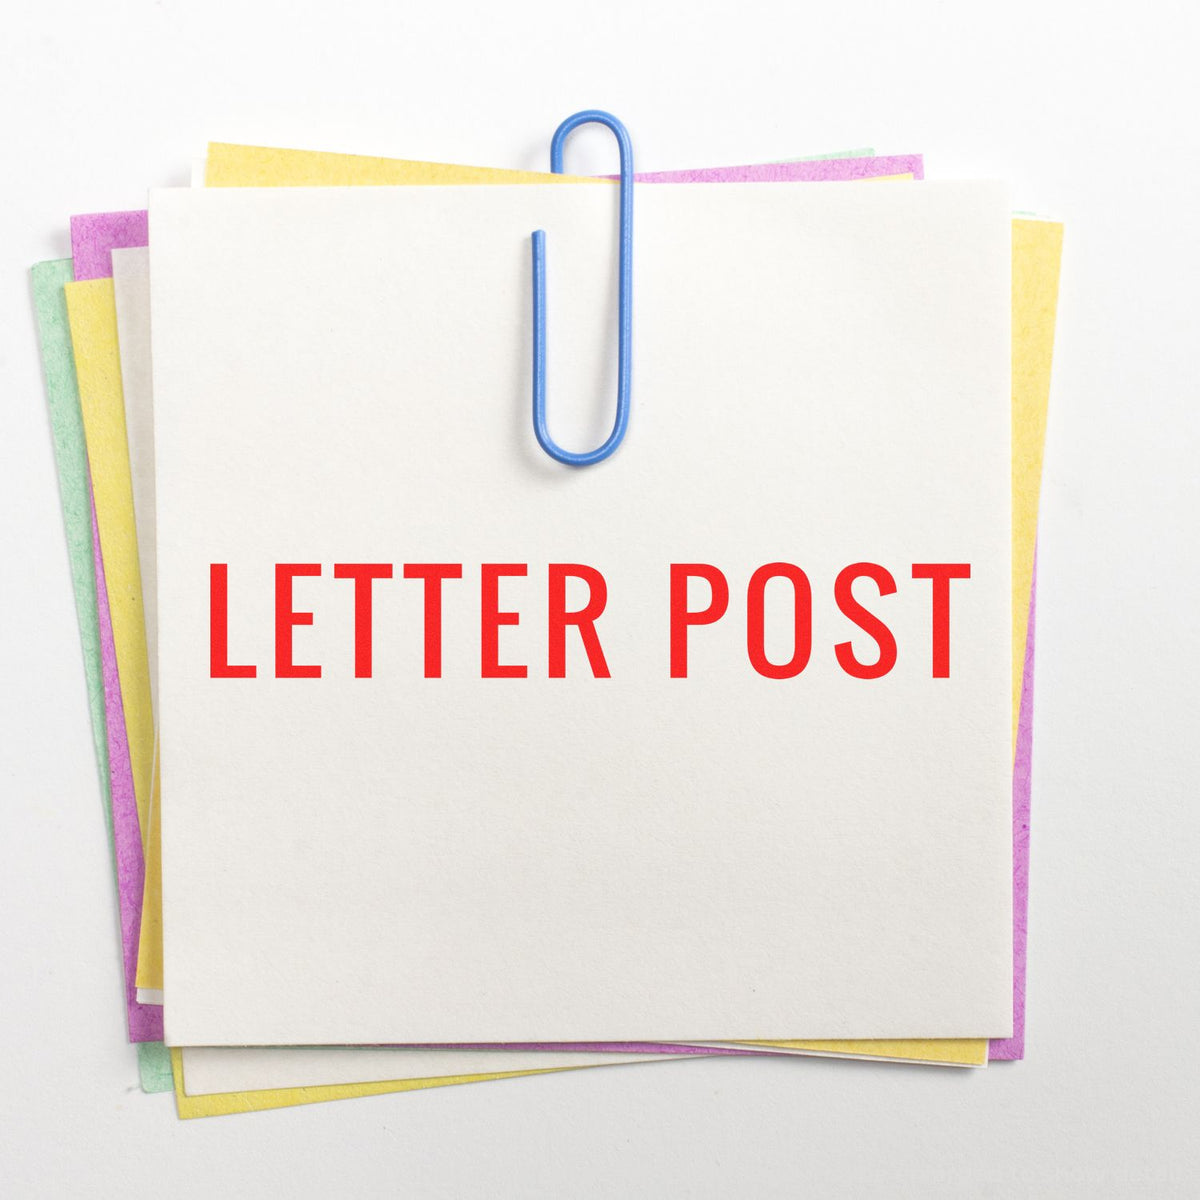 Self-Inking Letter Post Stamp In Use Photo